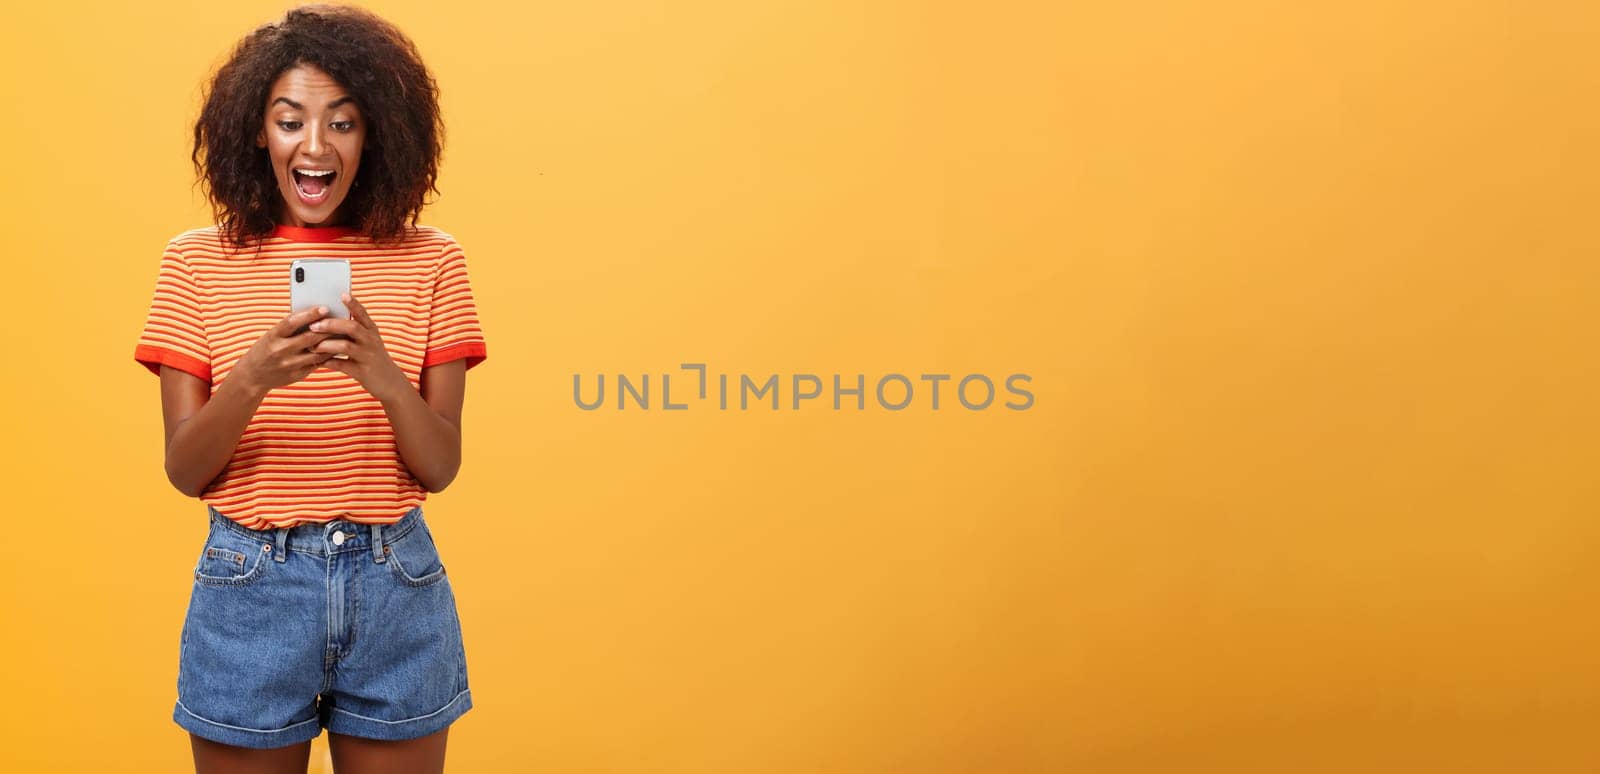 Girl expressing excitement and joy receiving awesome invitation via messages yelling from delight and happiness looking at smartphone screen impressed and thrilled over orange background.